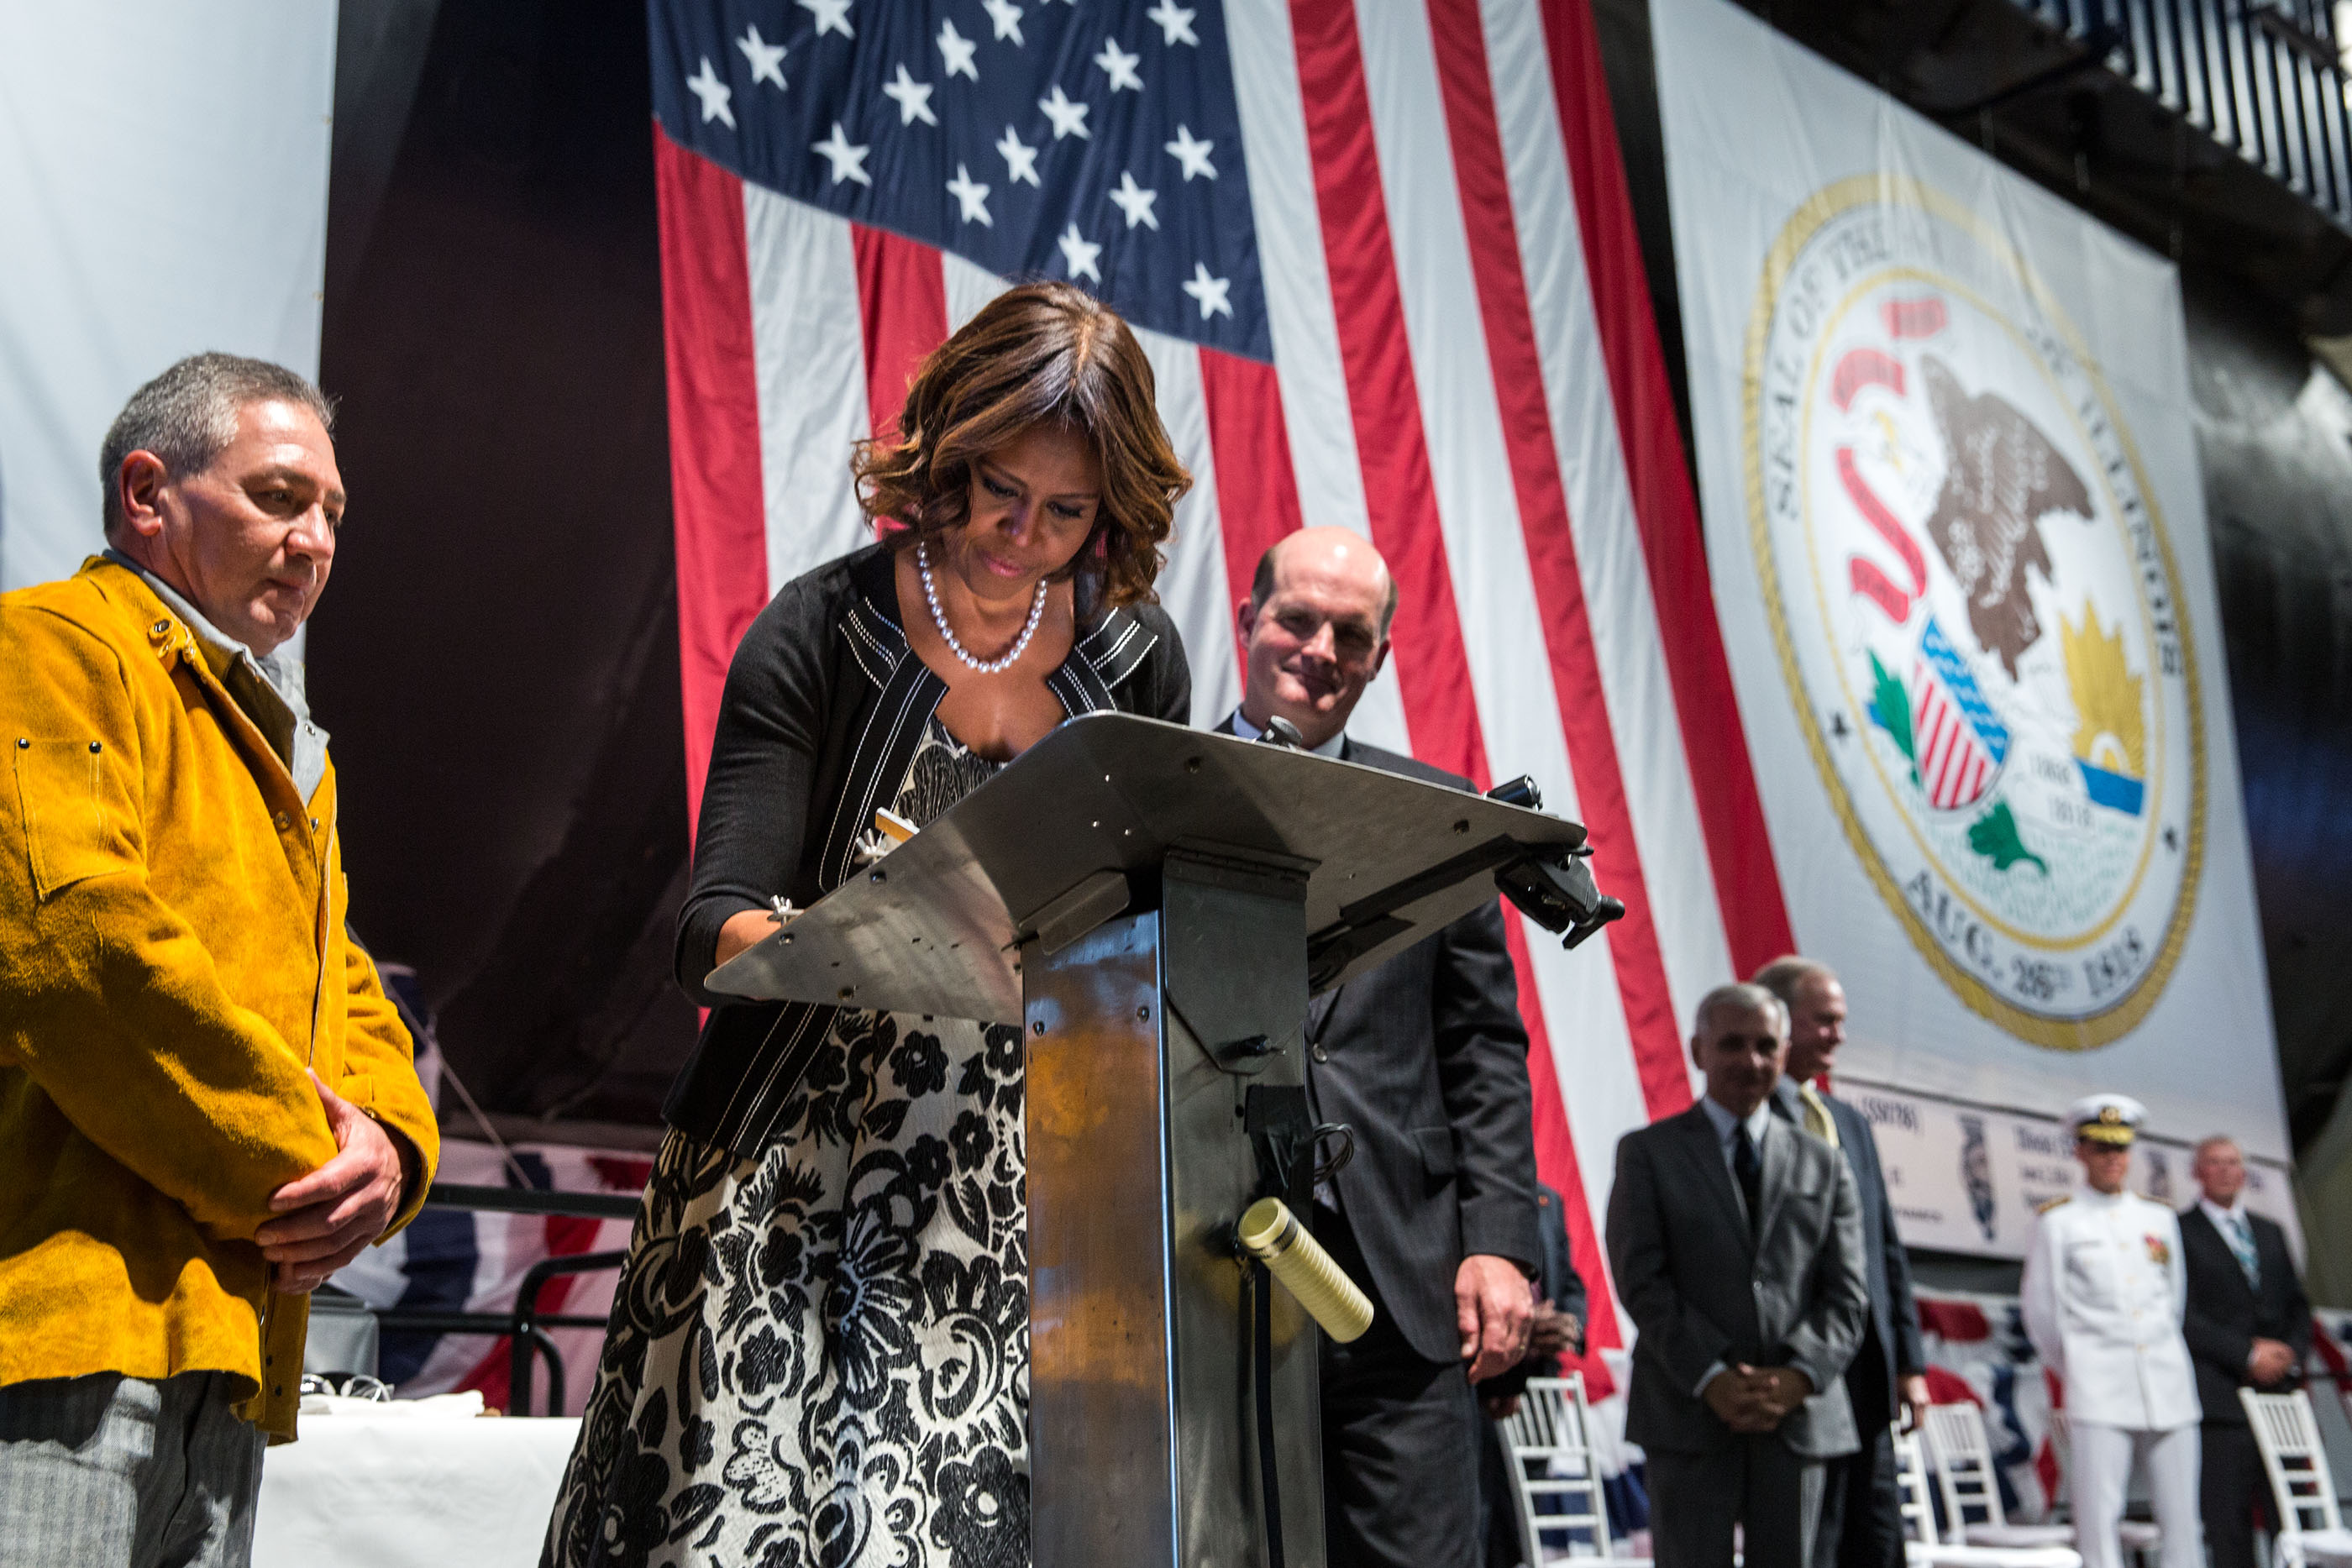 The First Lady participates in a keel-laying ceremony for the future USS ILLINOIS in North Kingston, R.I., June 2, 2014. (Official White House Photo by Chuck Kennedy)